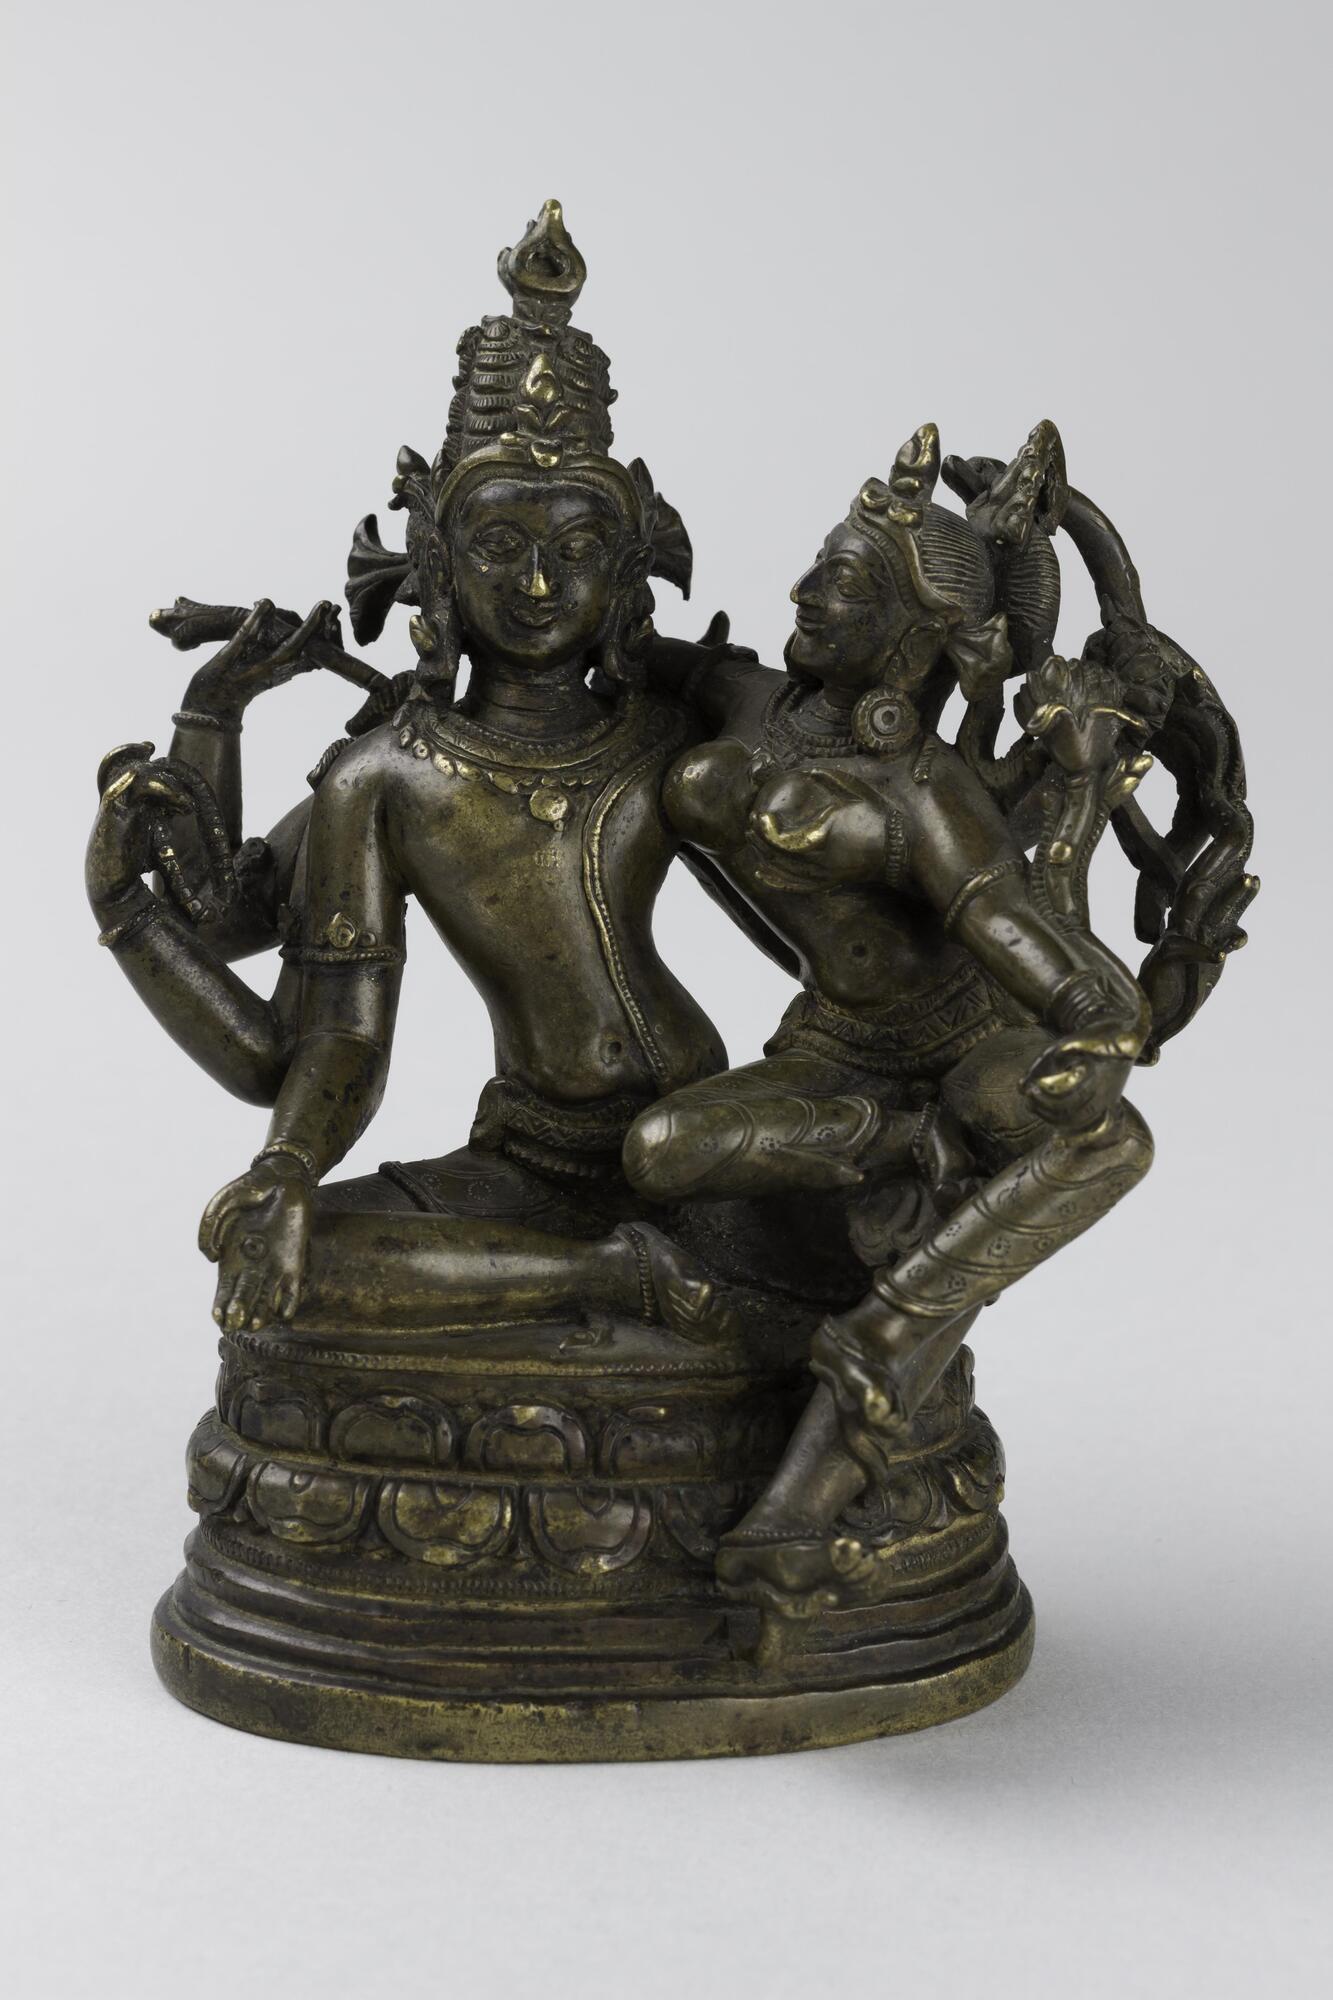 Shiva sits with his consort on a double lotus pedestal.  He has six arms, his right three are in varada mudra [a giving gesture], holds a rosary and an arrow.  His left arms cup his consorts left breast and hold a lotus flower and a bow.  He sits in royal ease, with one leg pendant.  He wears bracelets, armlets, necklaces, earrings, and a sacred thread that stretches form his left shoulder down past his waist.  On his head he wears an elaborate jatamukuta, a crown interlaced with his matted locks.  Parvati sits upon his knee with one leg tucked under her and the other pendant.  She is also adorned with jewelry, but wears a more modest diadem at the front of her head.<br />